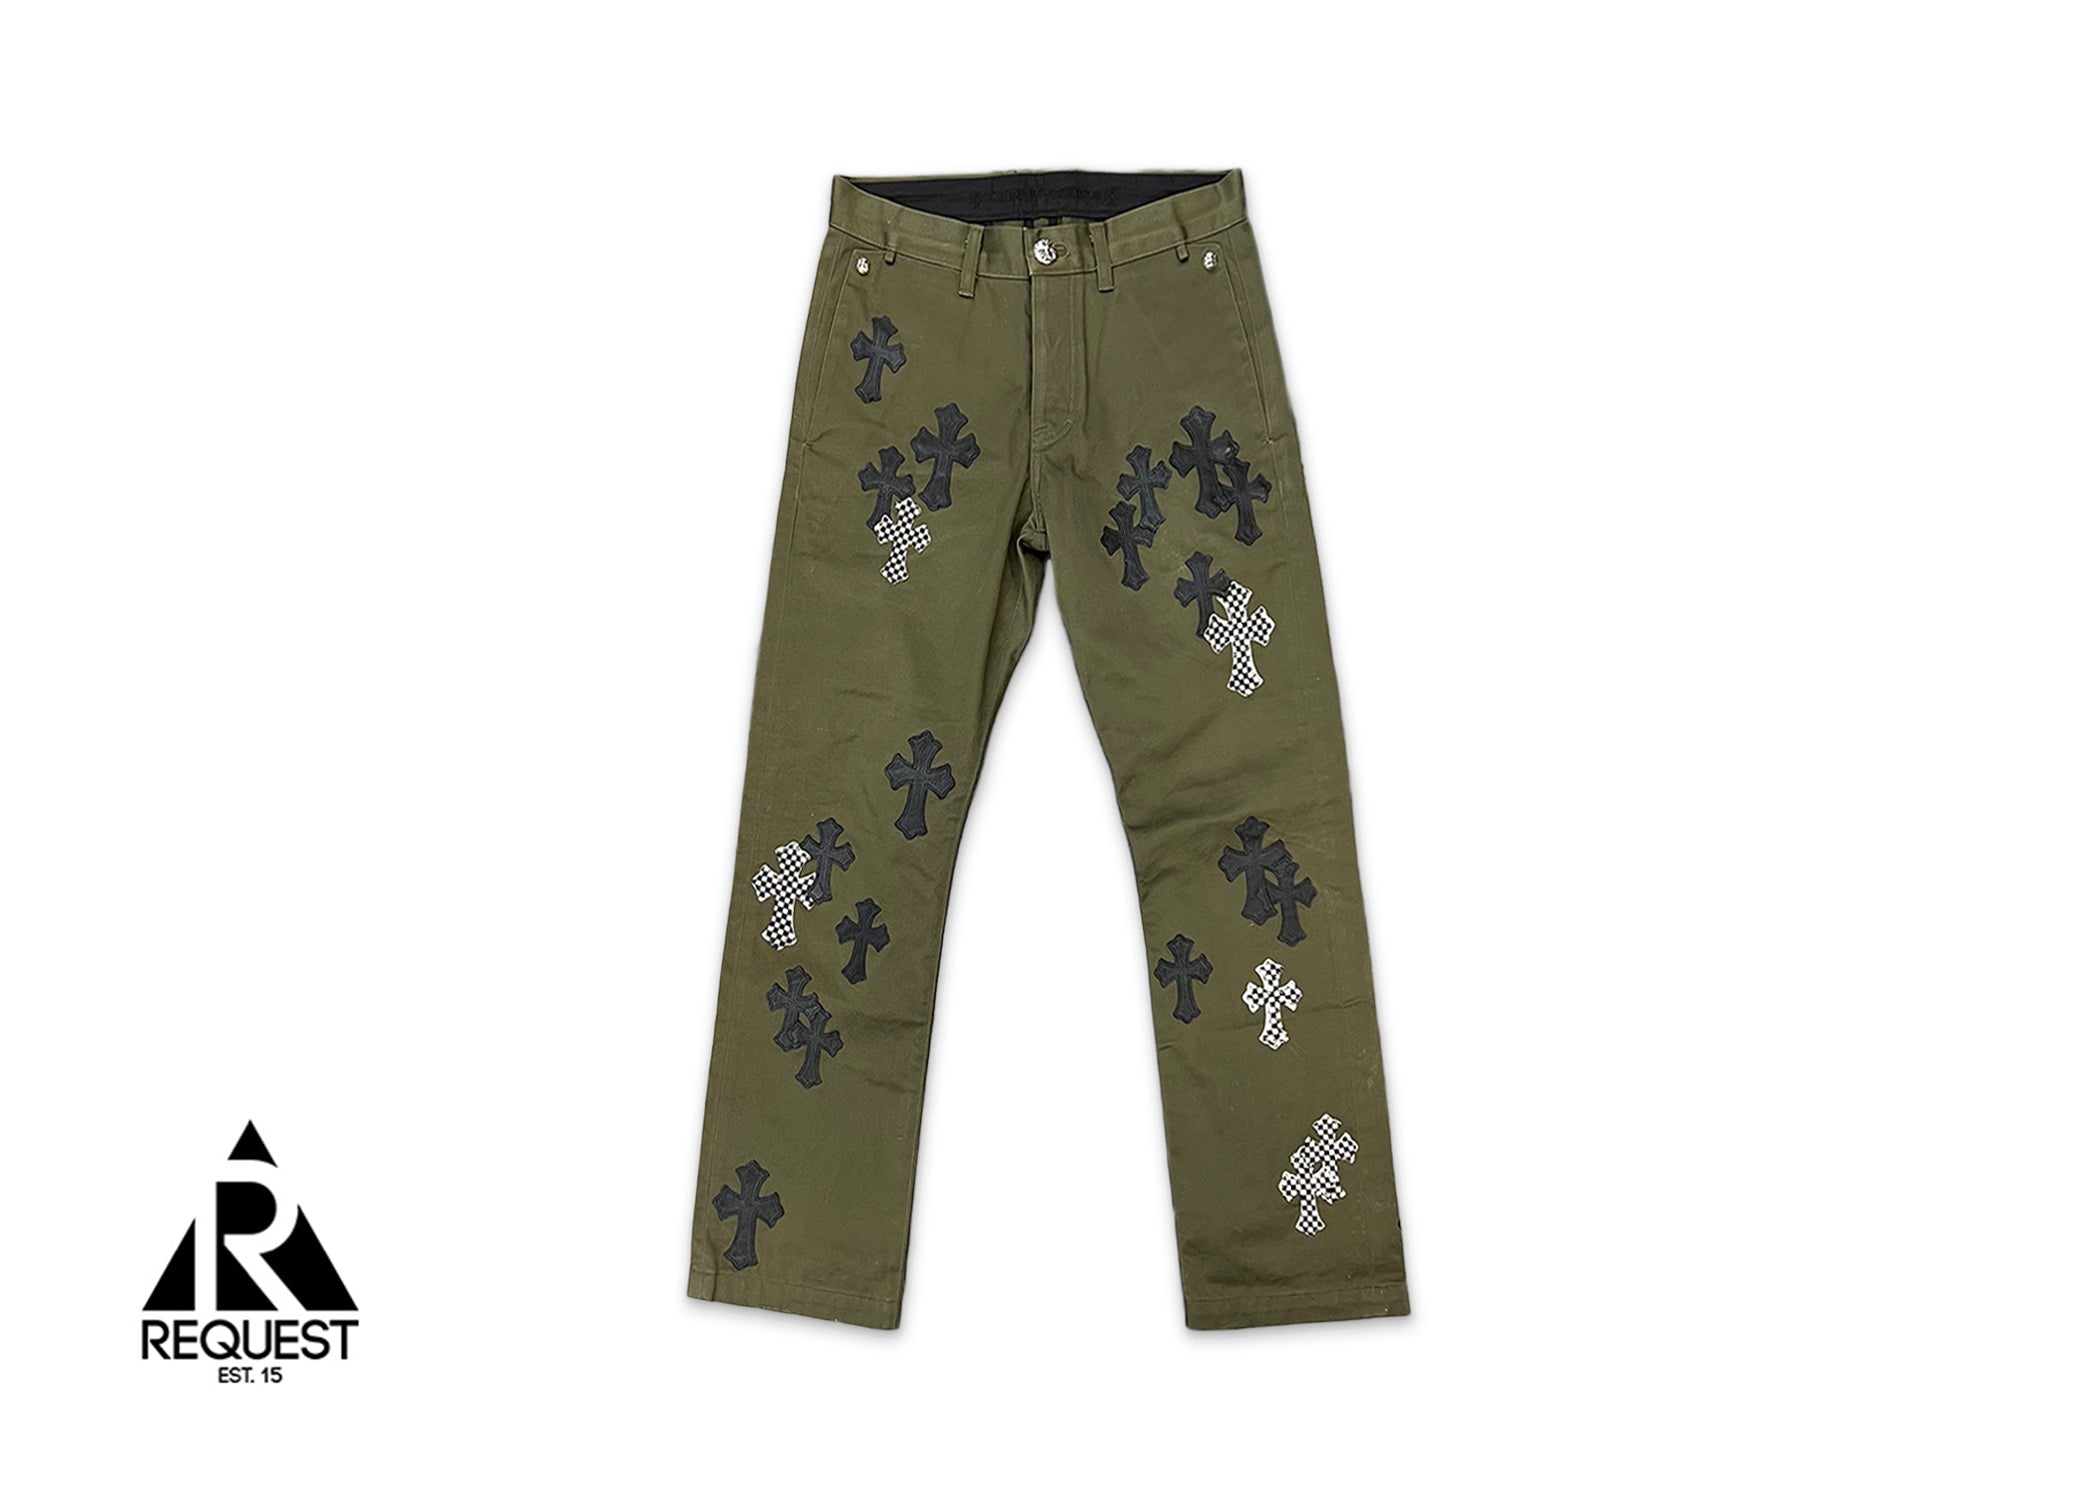 Chrome Hearts Olive Chino 1 Of 1 Pants 